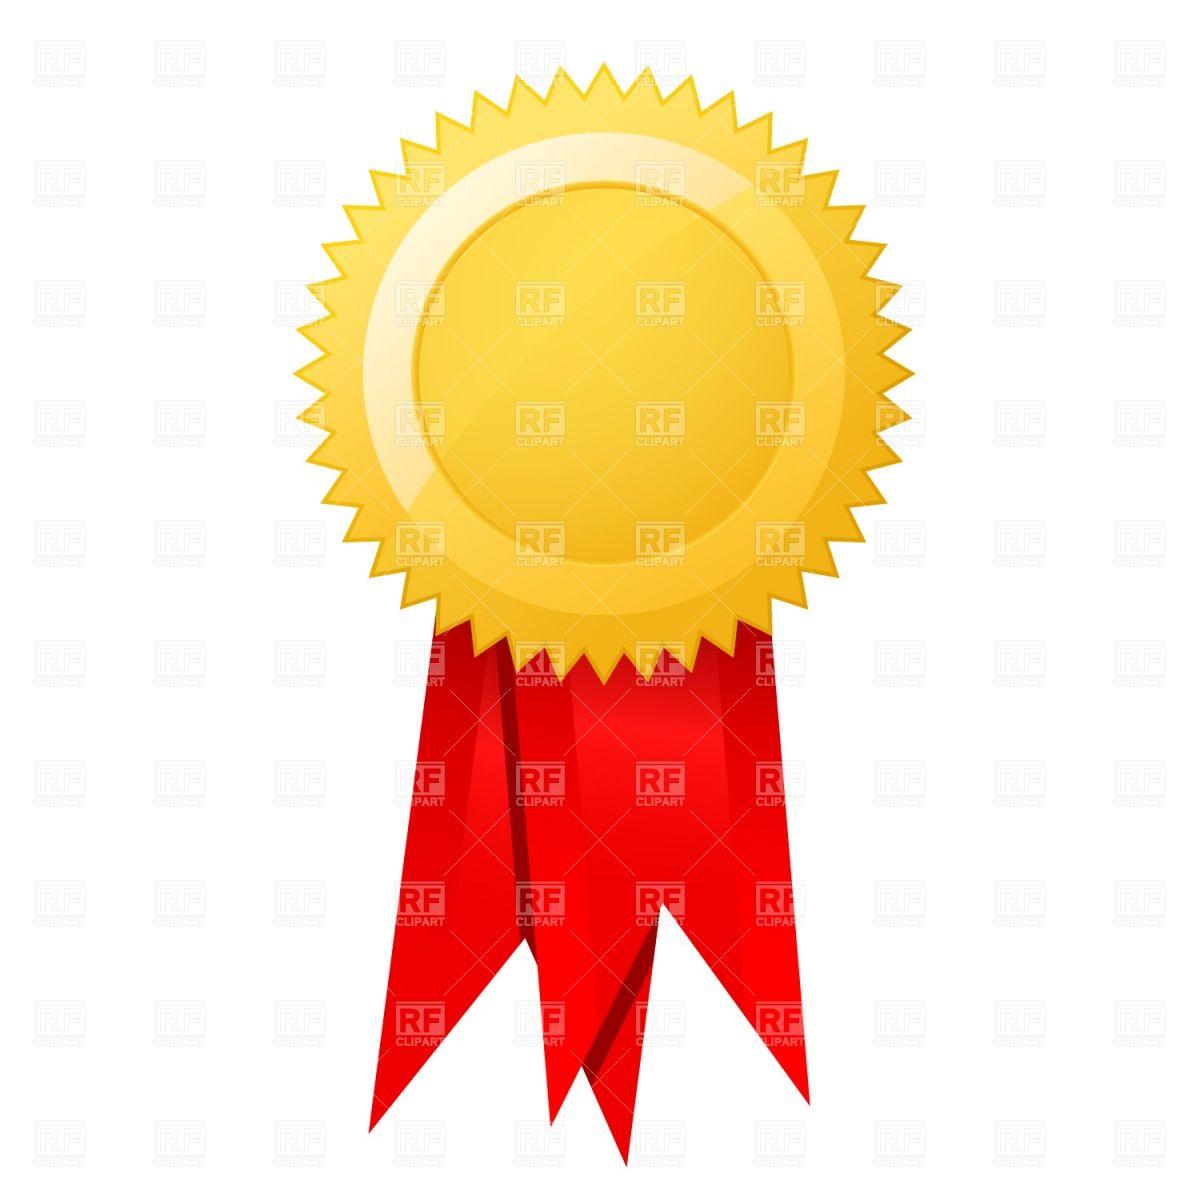 Red Prize Ribbon Logo - Red ribbon award image library stock - RR collections